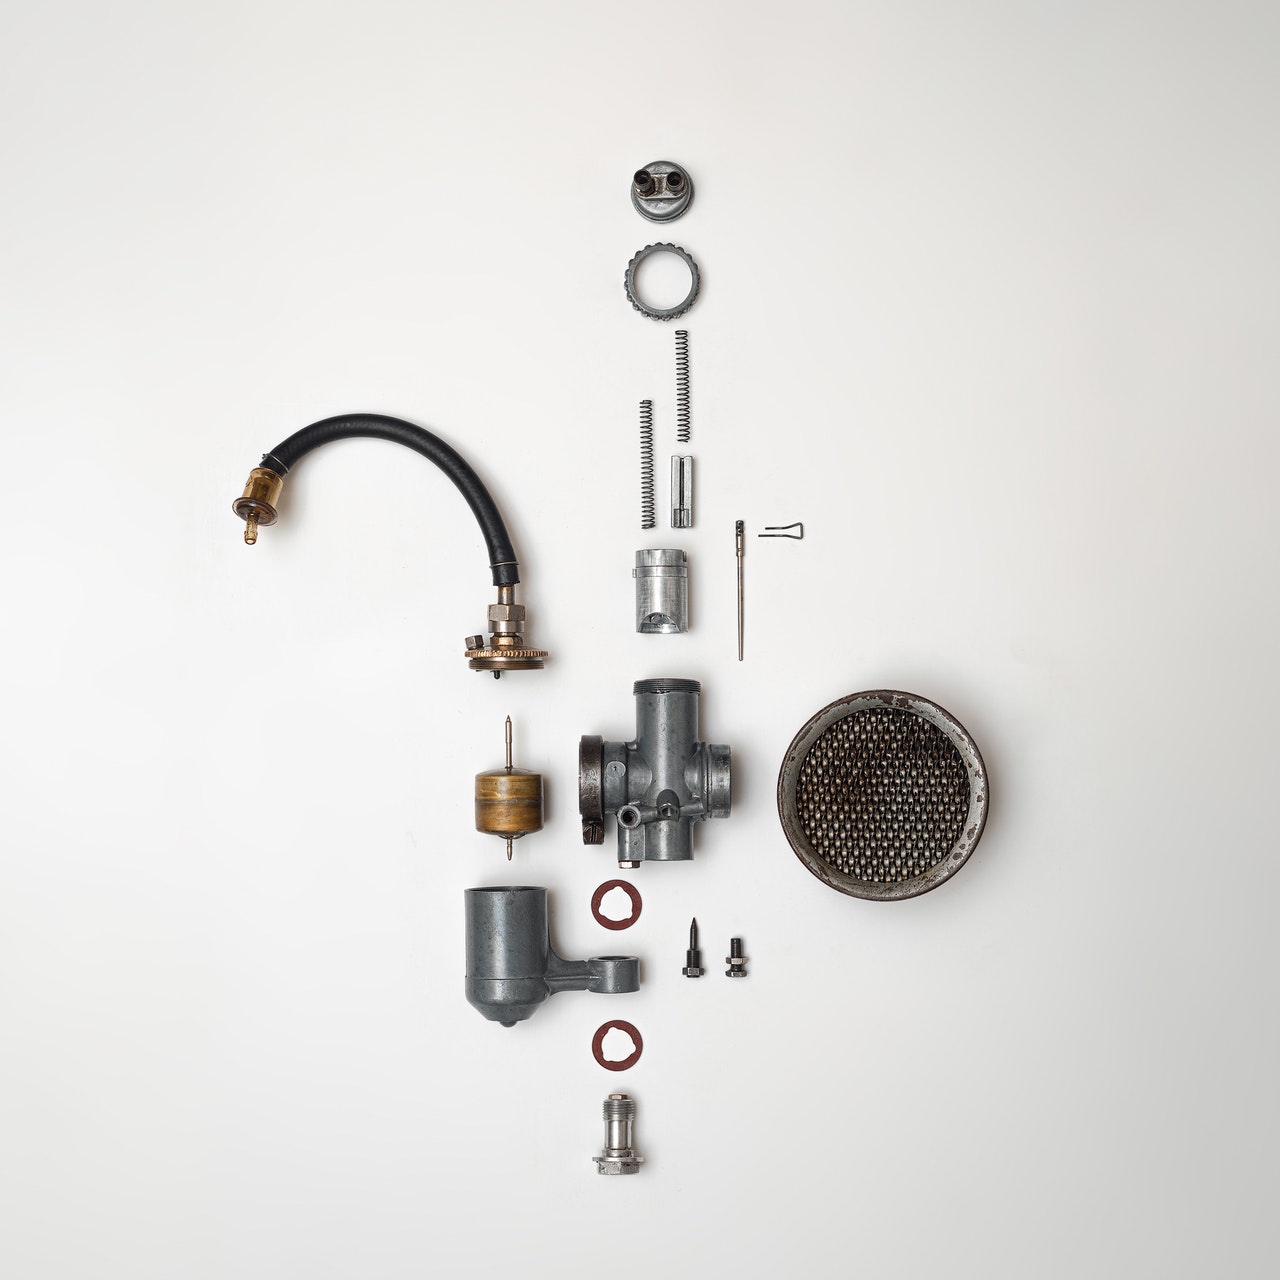 deconstructed plumbing products